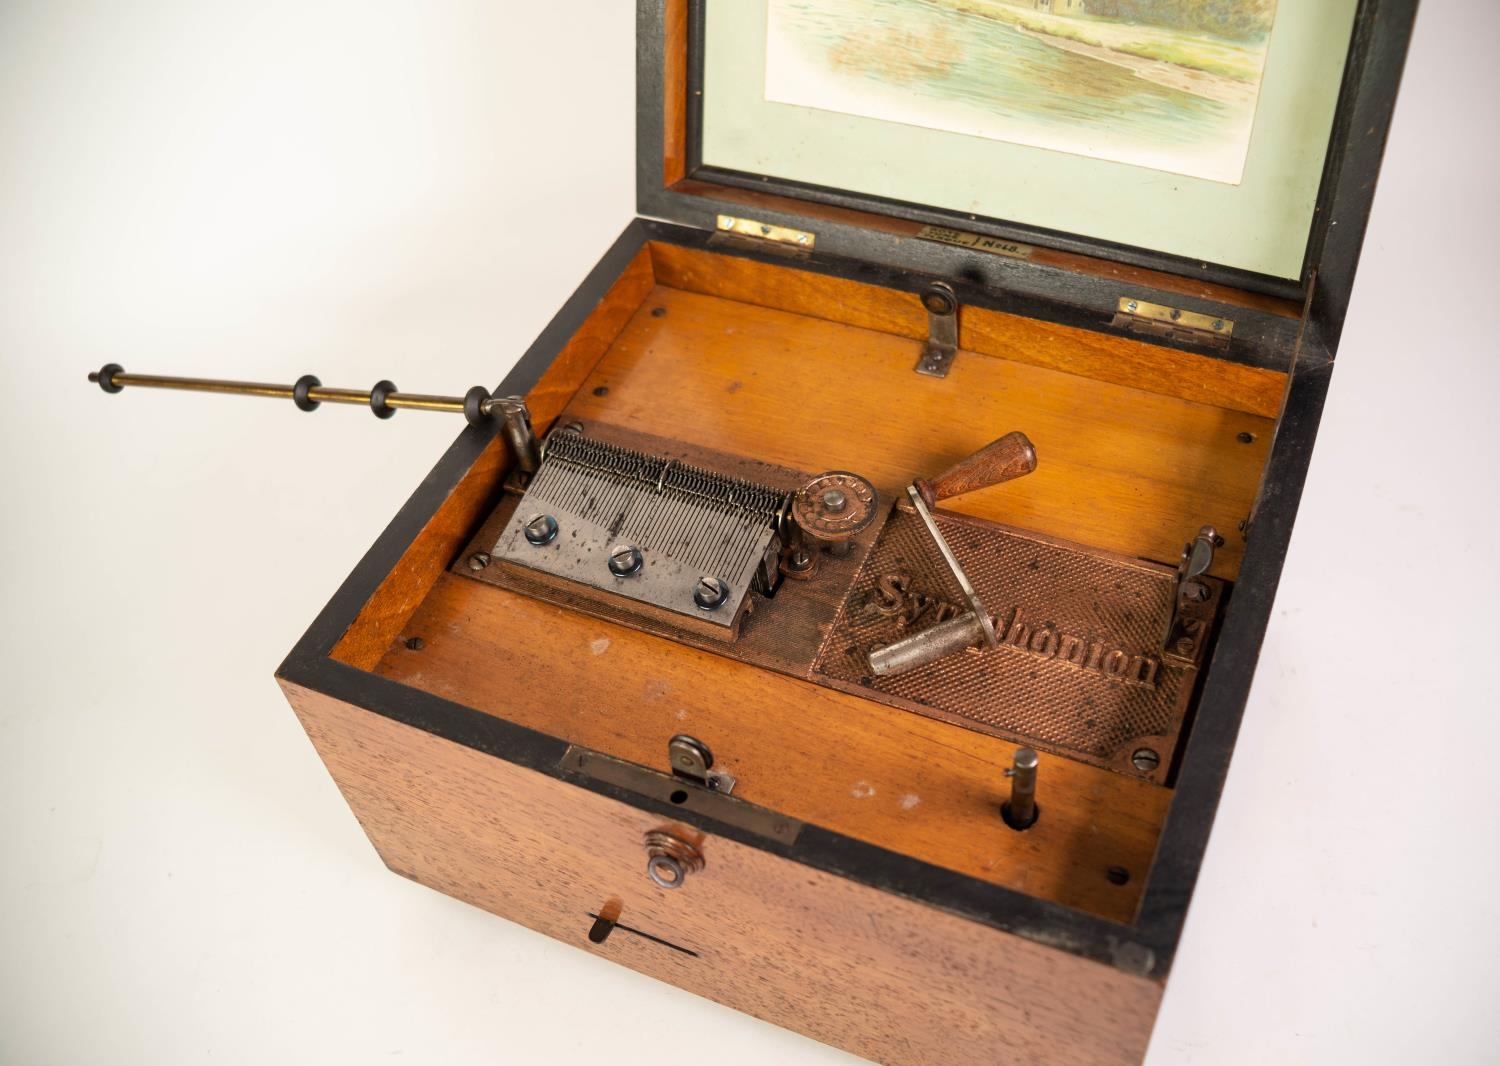 A LATE NINETEENTH CENTURY SYMPHONION TABLE DISC MUSIC BOX, playing 10" (25.4cm) discs on a 4 1/4" ( - Image 2 of 3